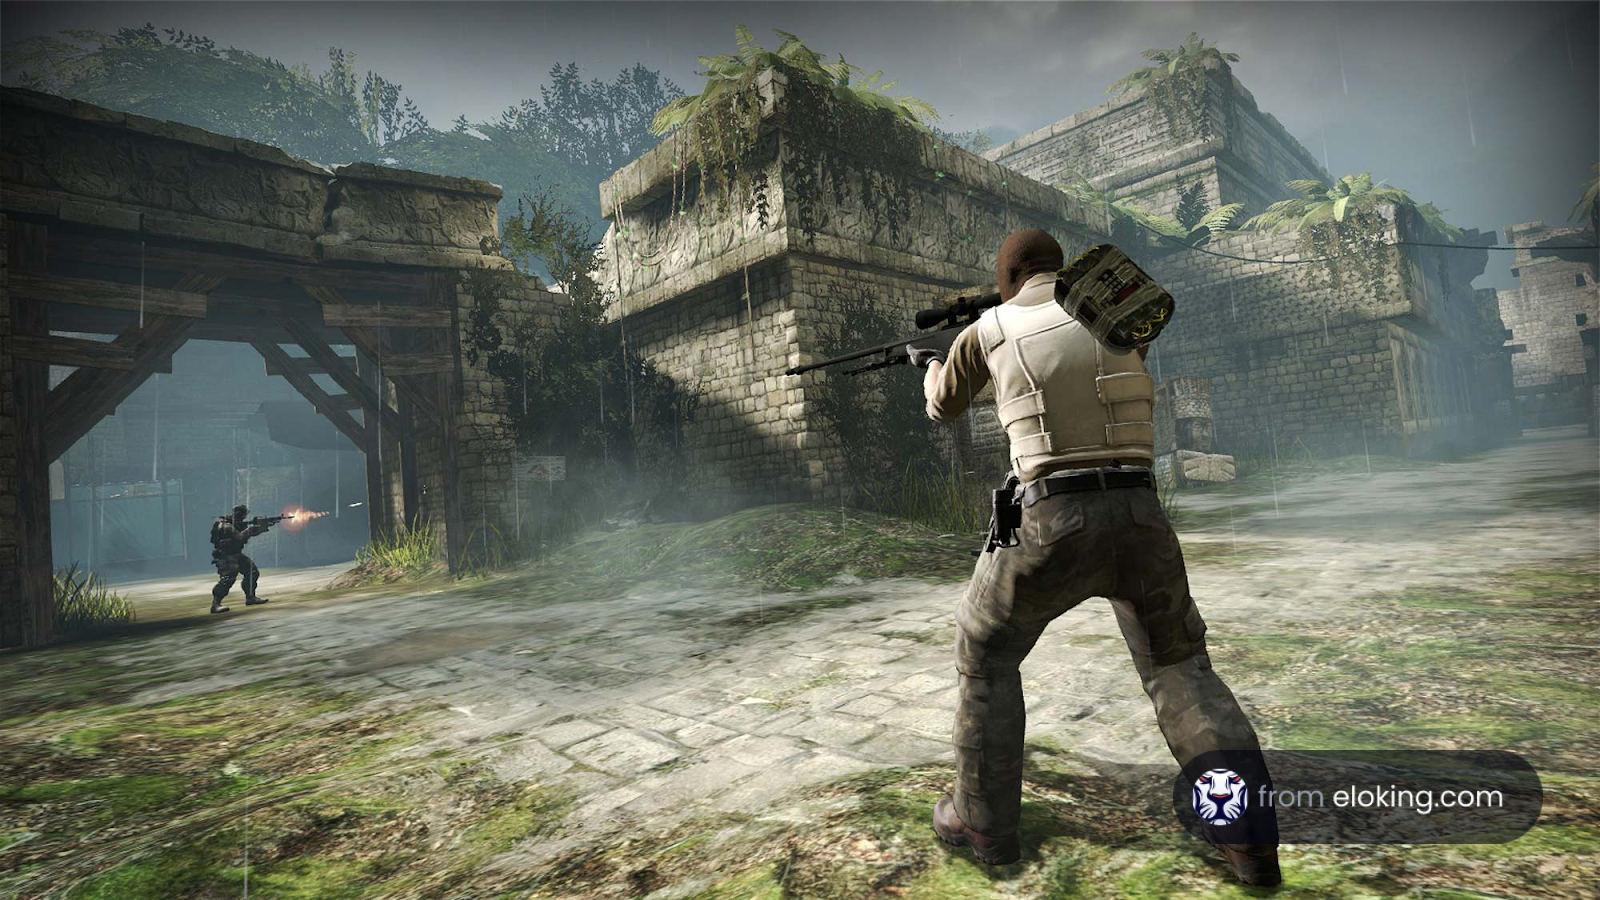 Two video game characters engaged in a shooting combat in a ruine environment